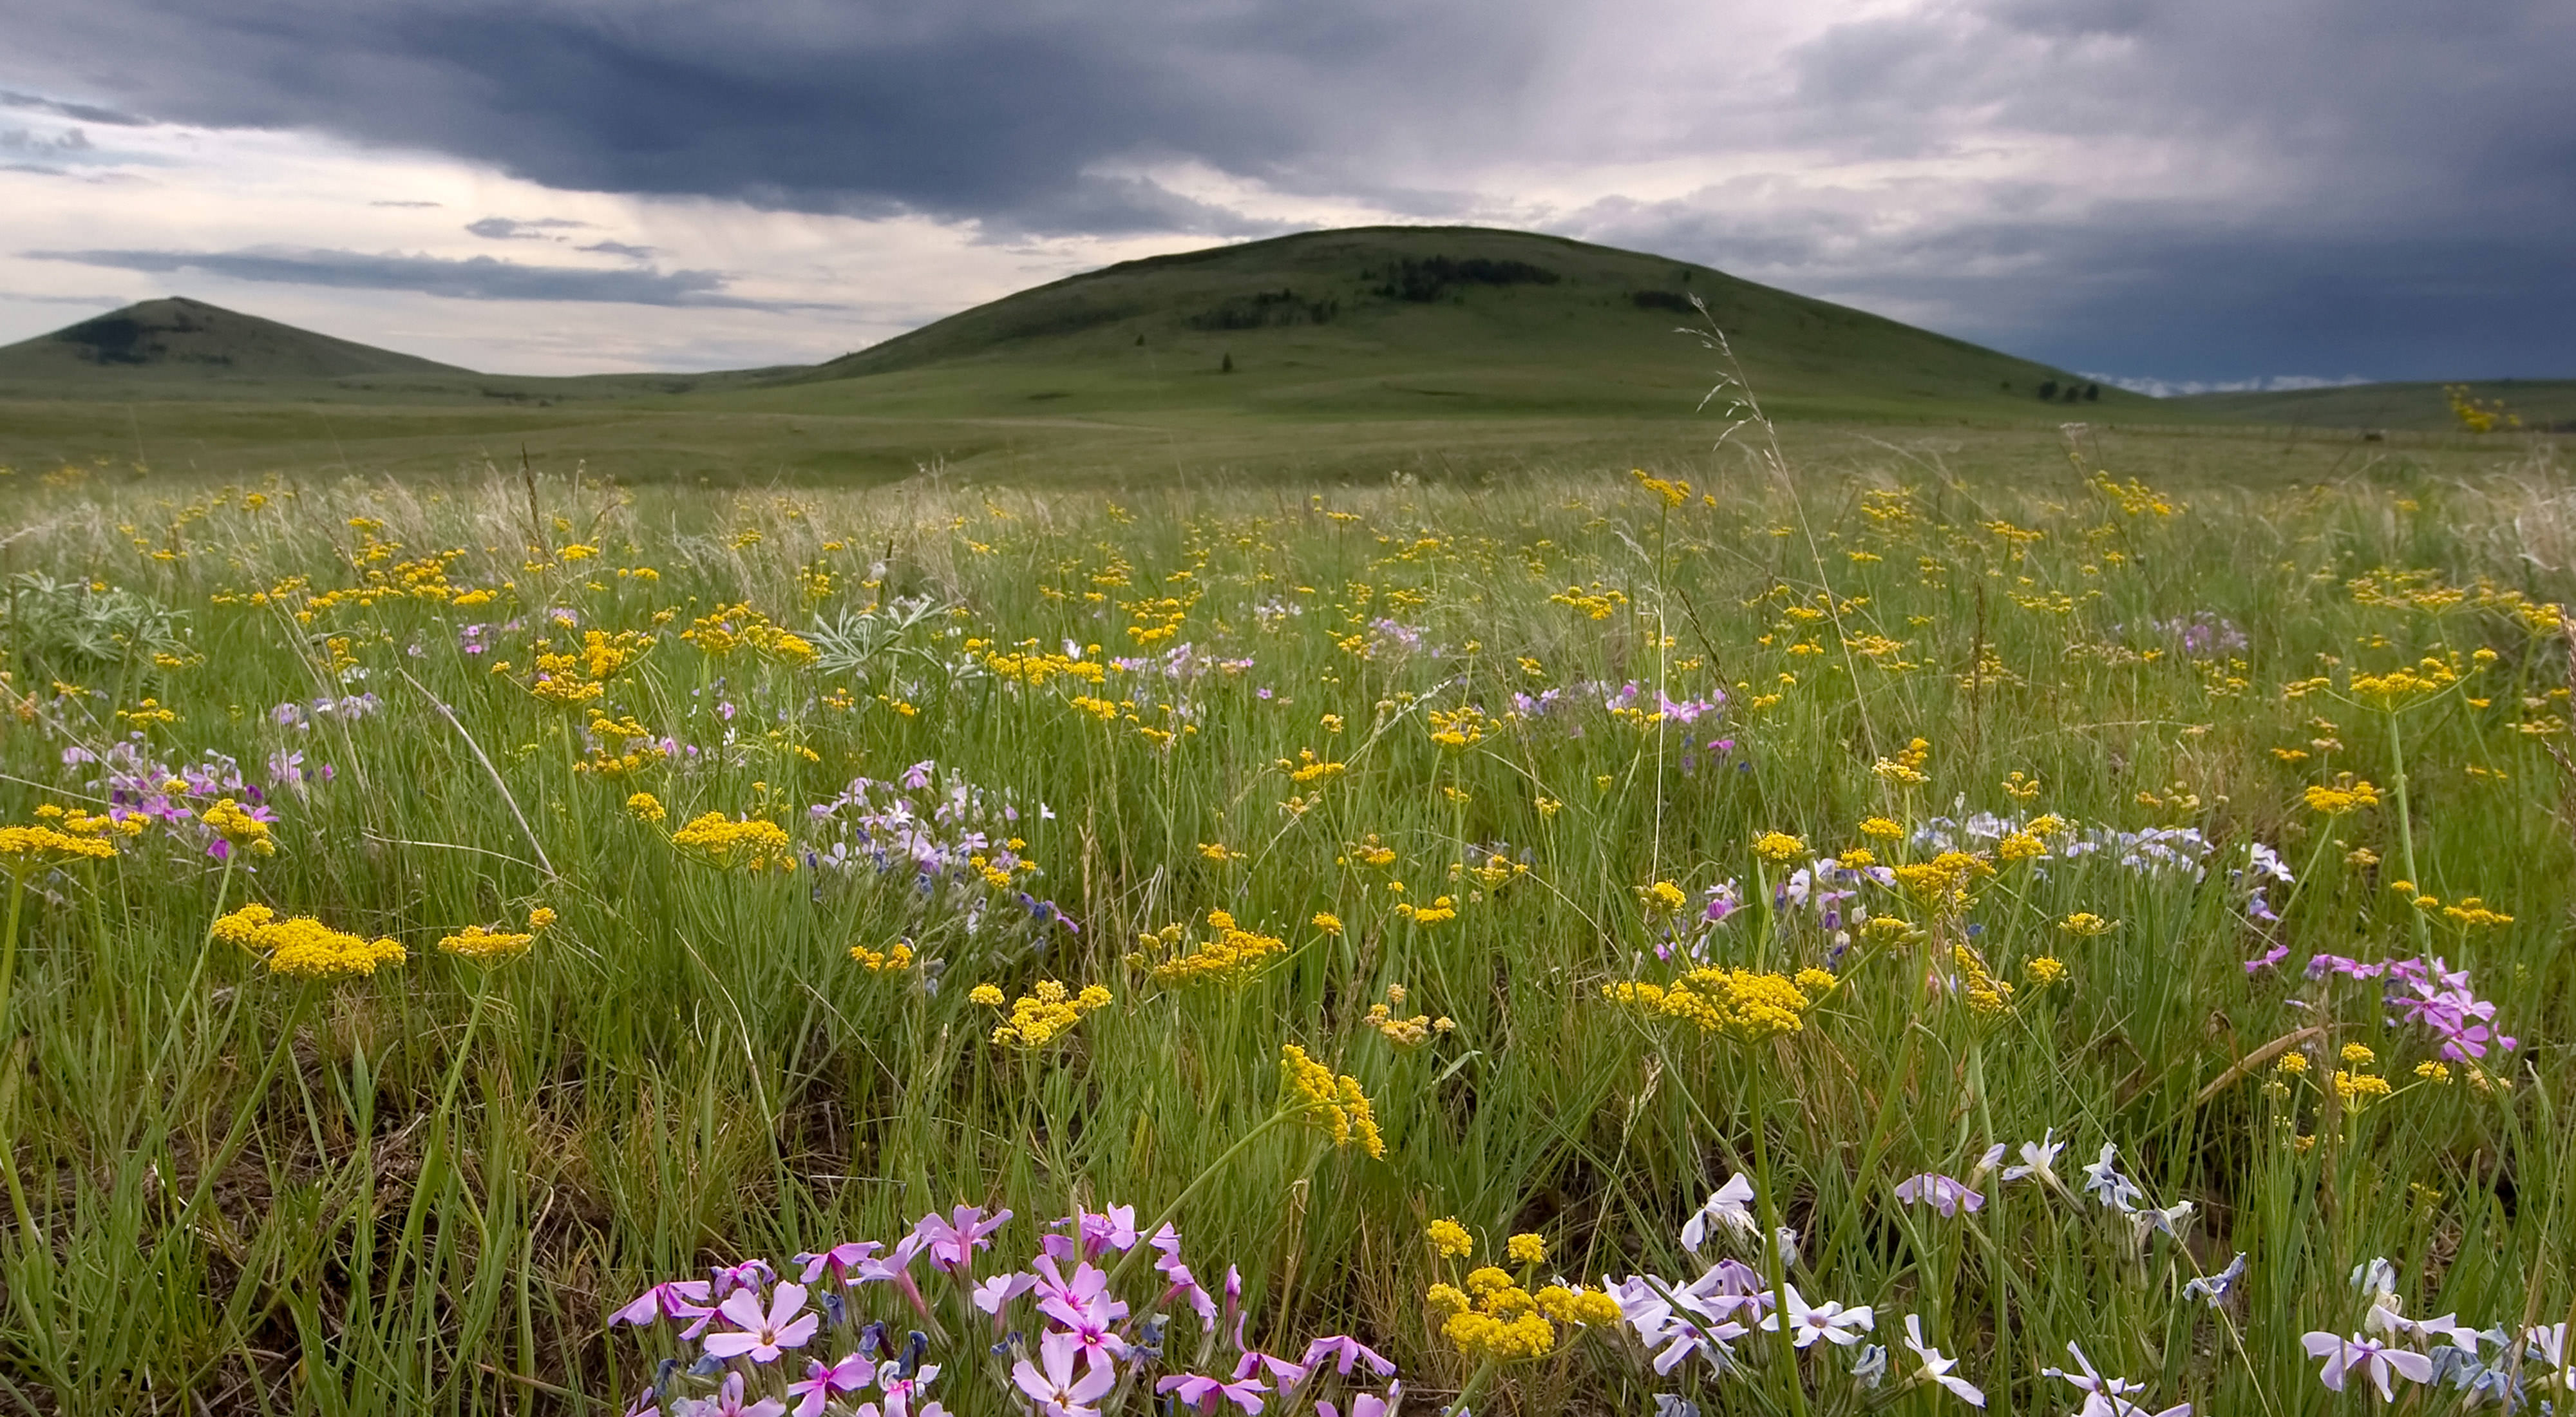 A lush, green and wild meadow with vibrant wildflowers.